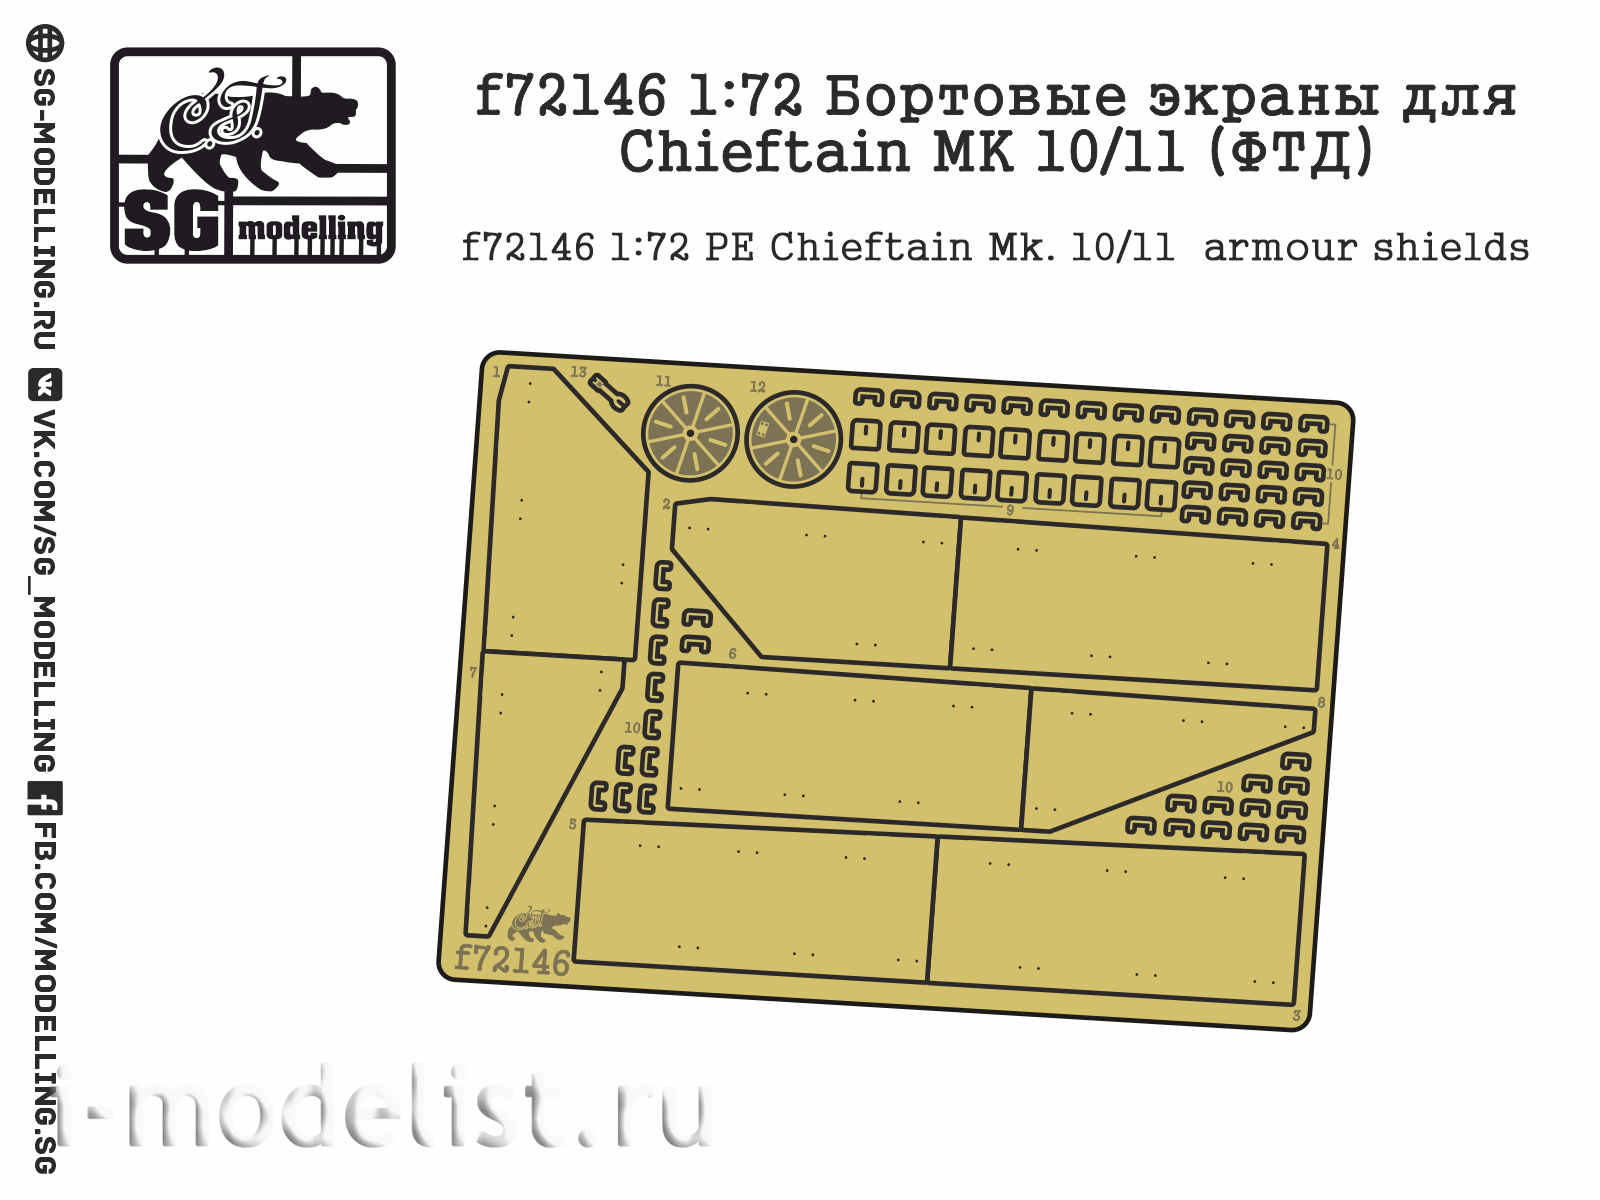 F72146 SG modeling 1/72 side screens for Chieftain MK 10/11 (FTD)